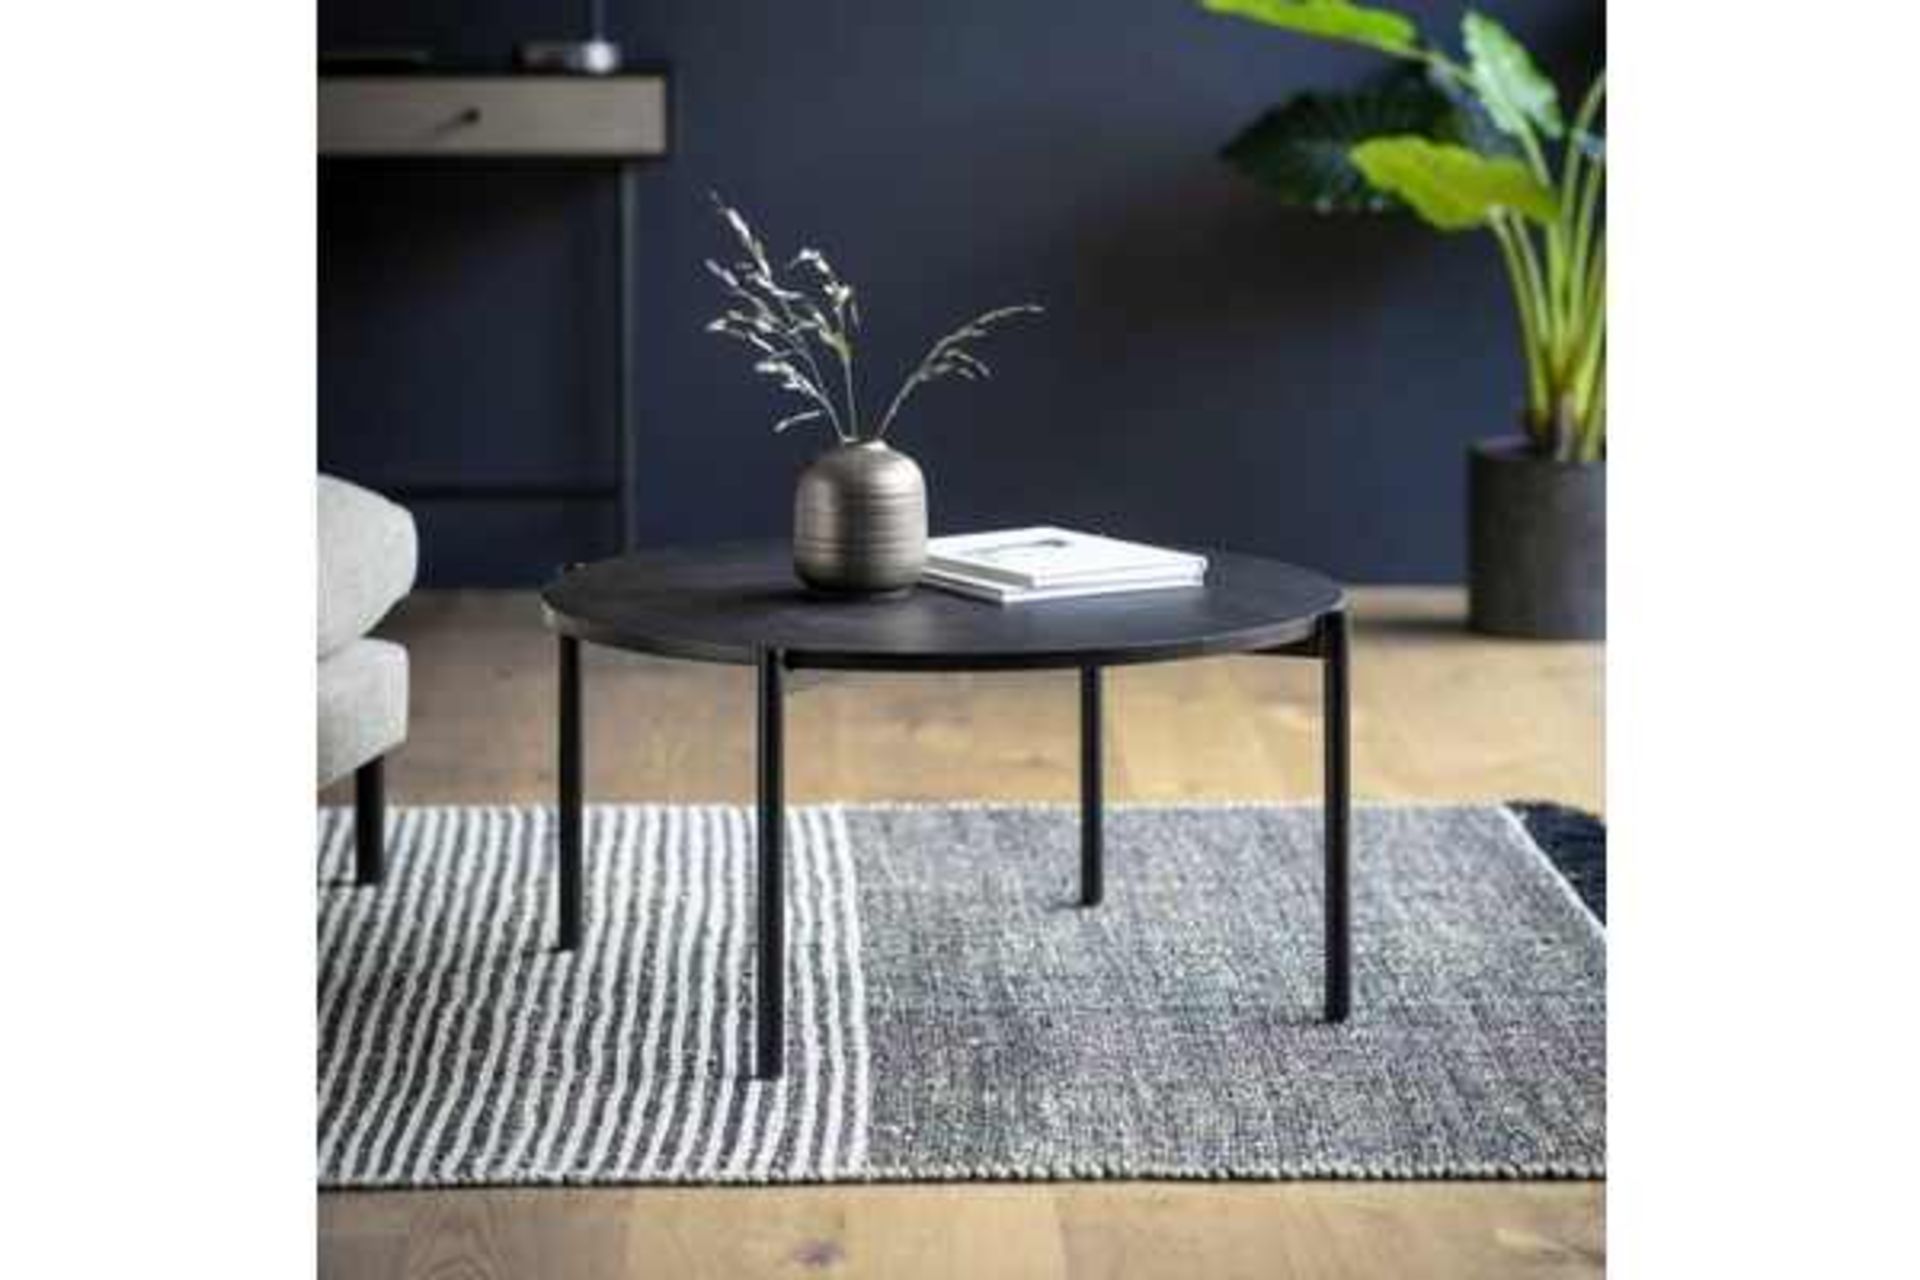 Carbury Coffee Table Black 850 x 850 x 400mm The Carbury Black Coffee Table Is A Beautiful Accent To